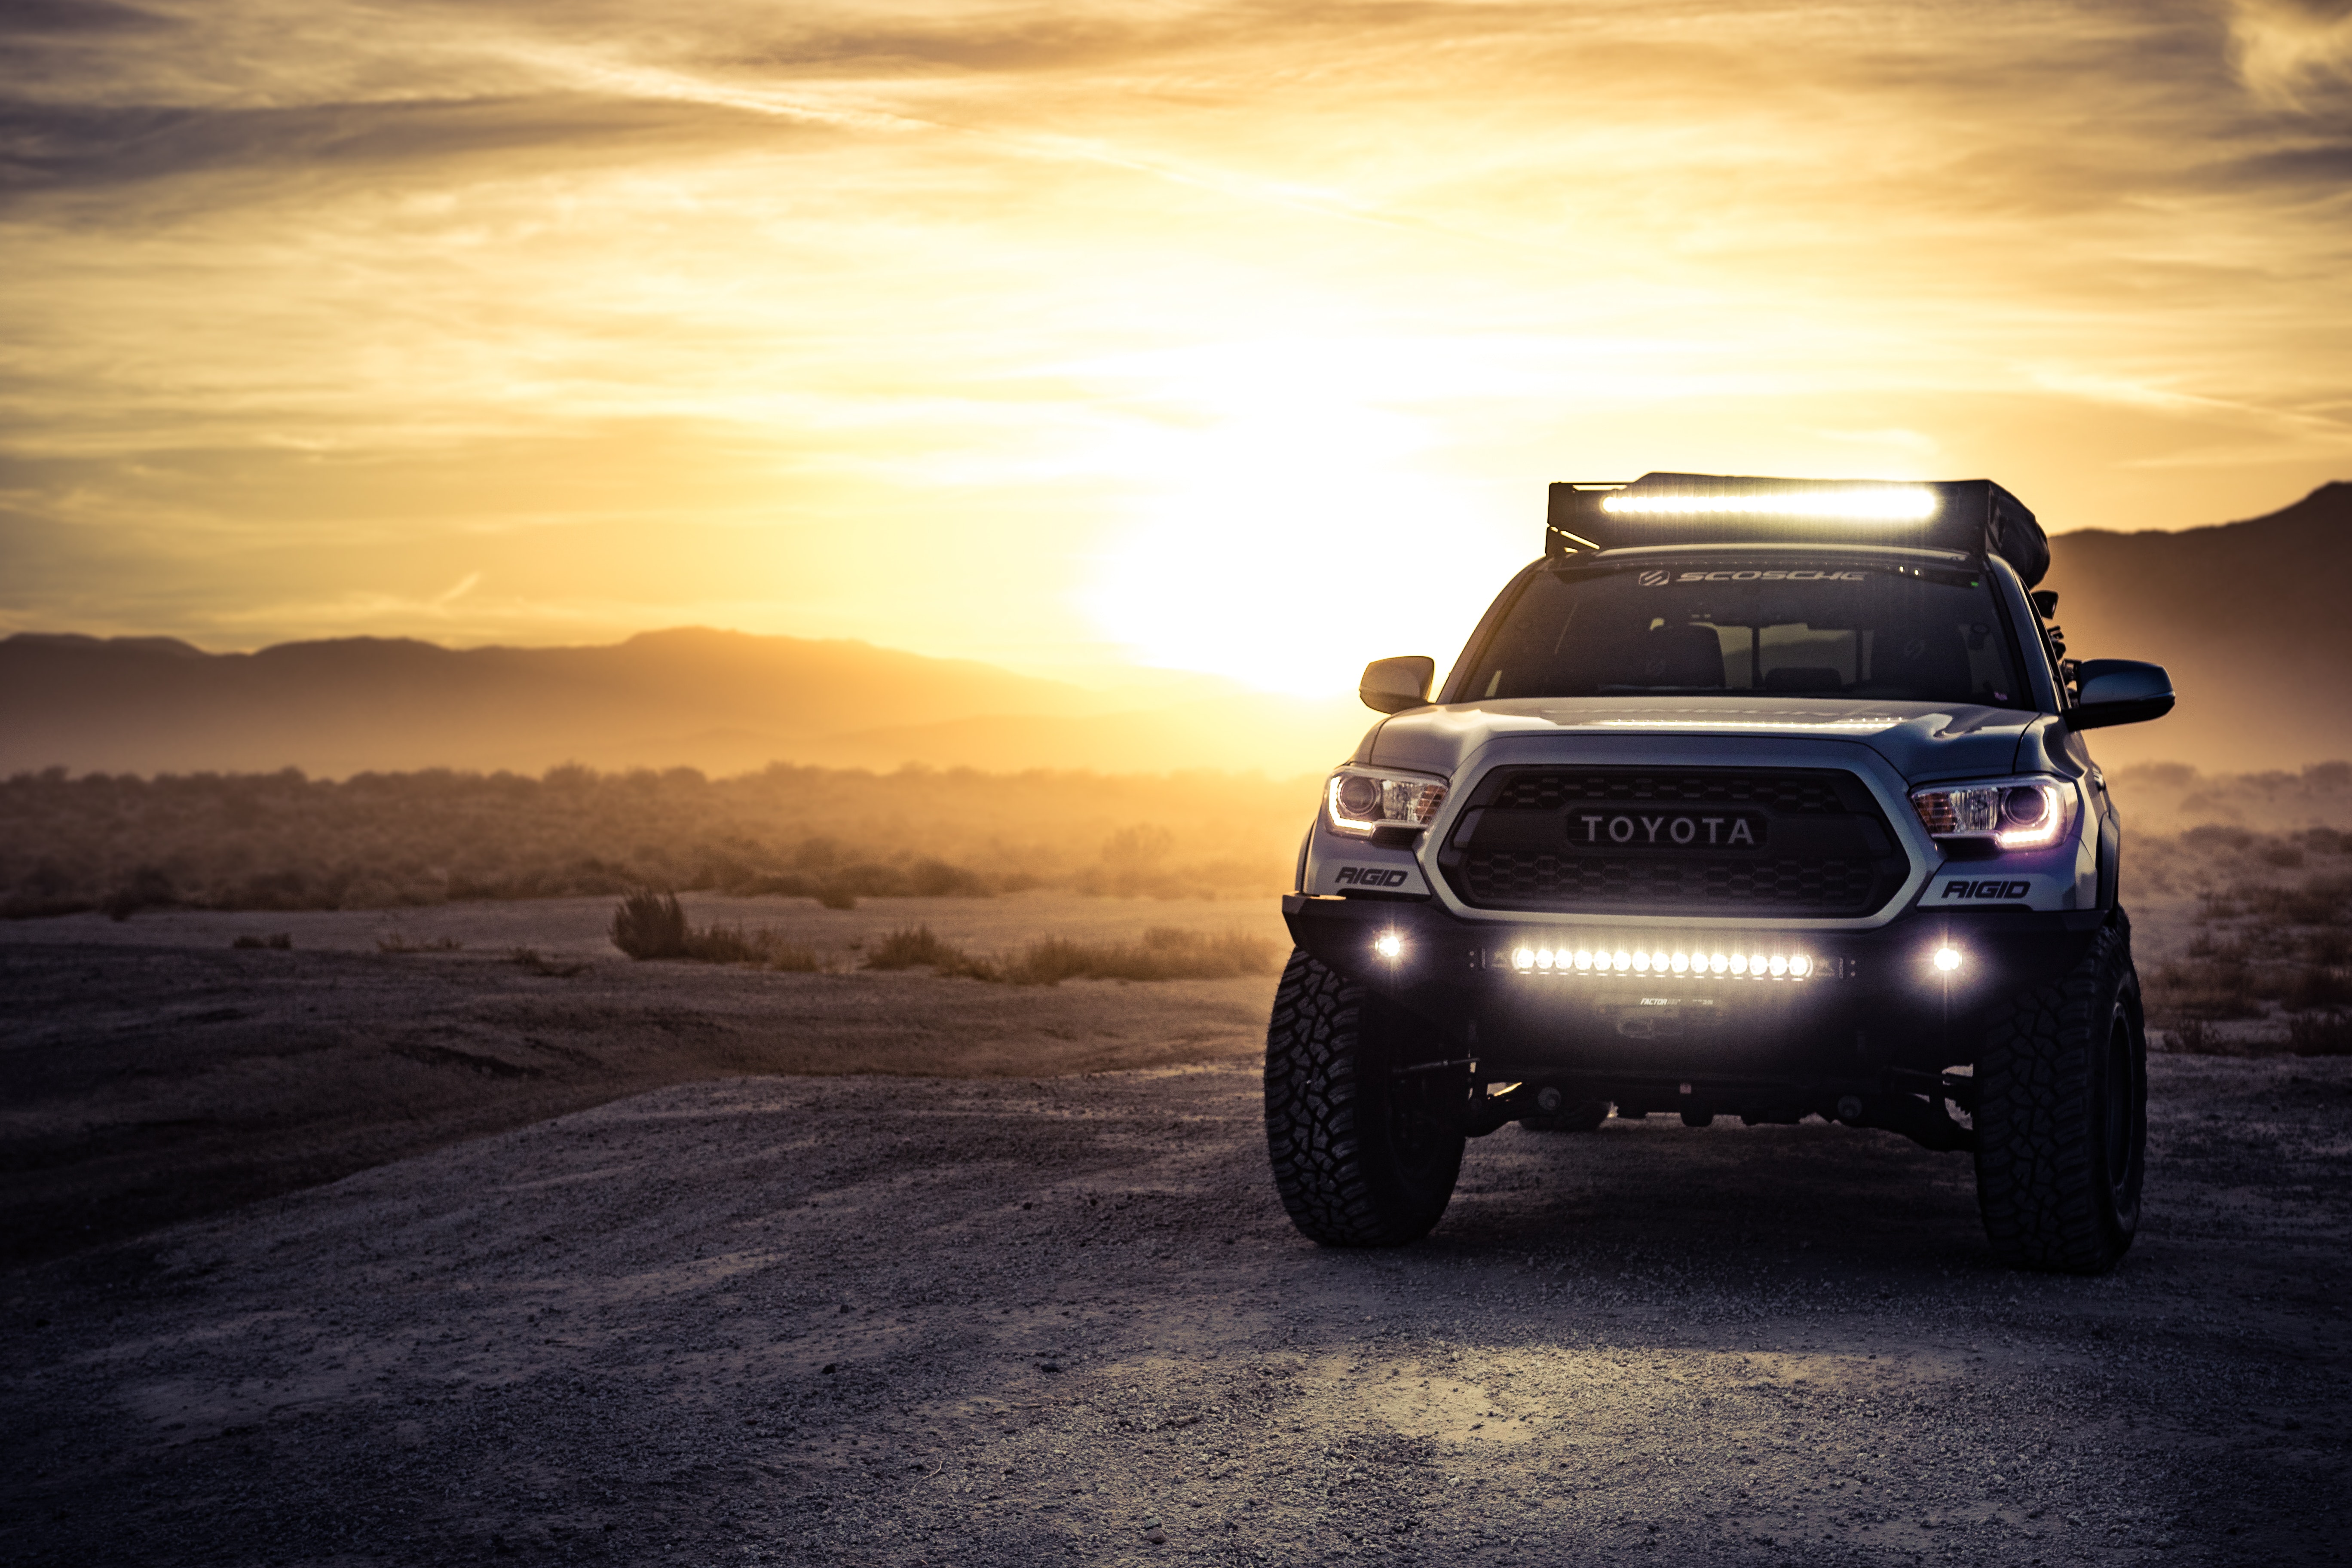 Best Toyota Tacoma wallpapers for phone screen